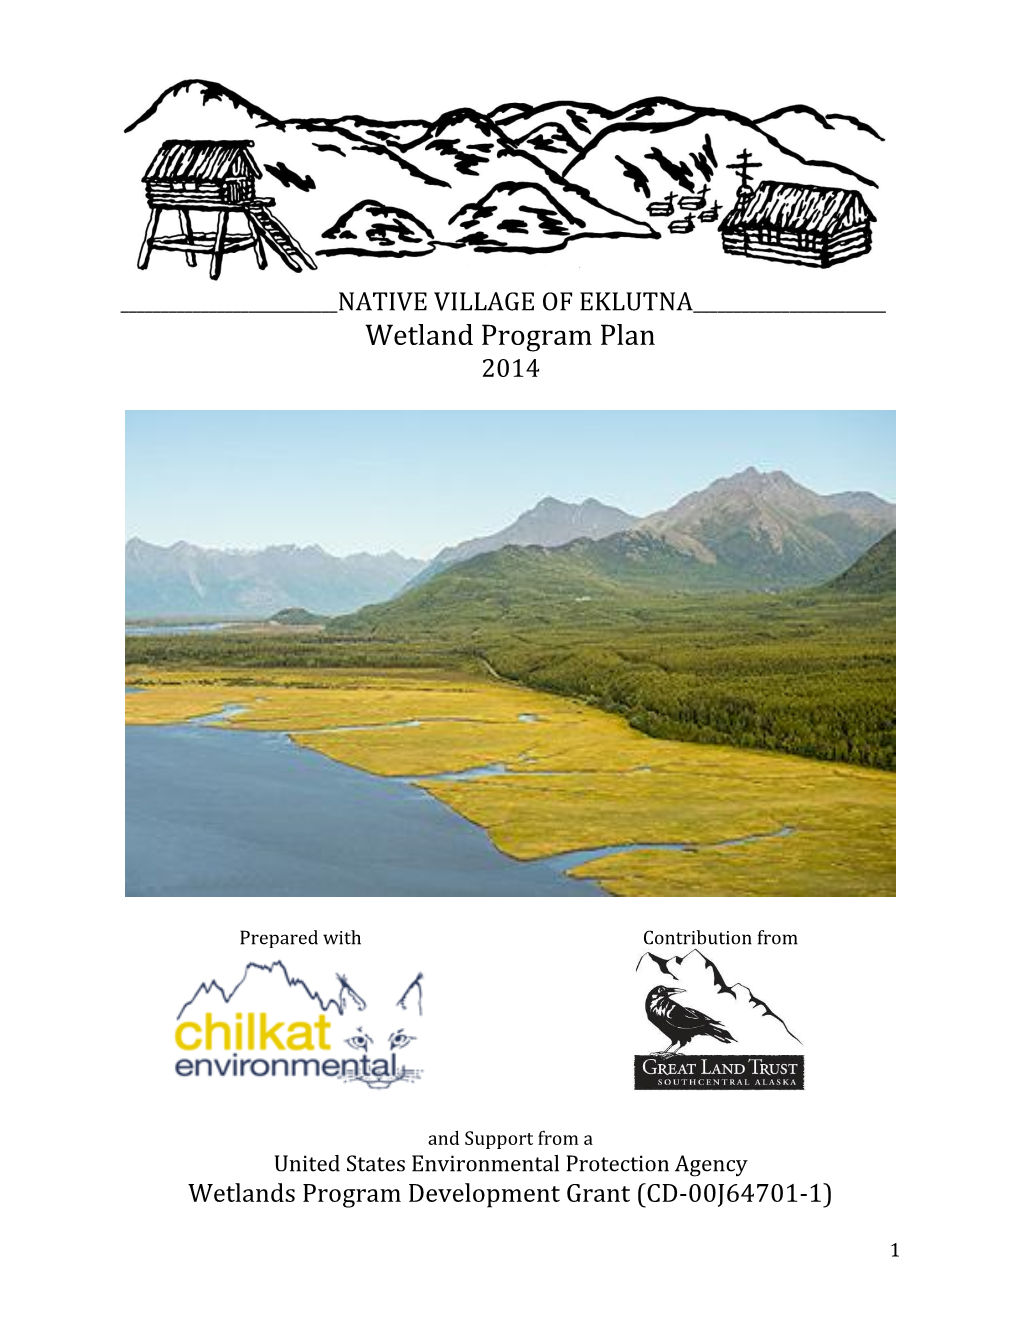 Native Village of Eklutna Wetland Program Plan 2014 Covers a 5 Year Period from 2015 Through 2019